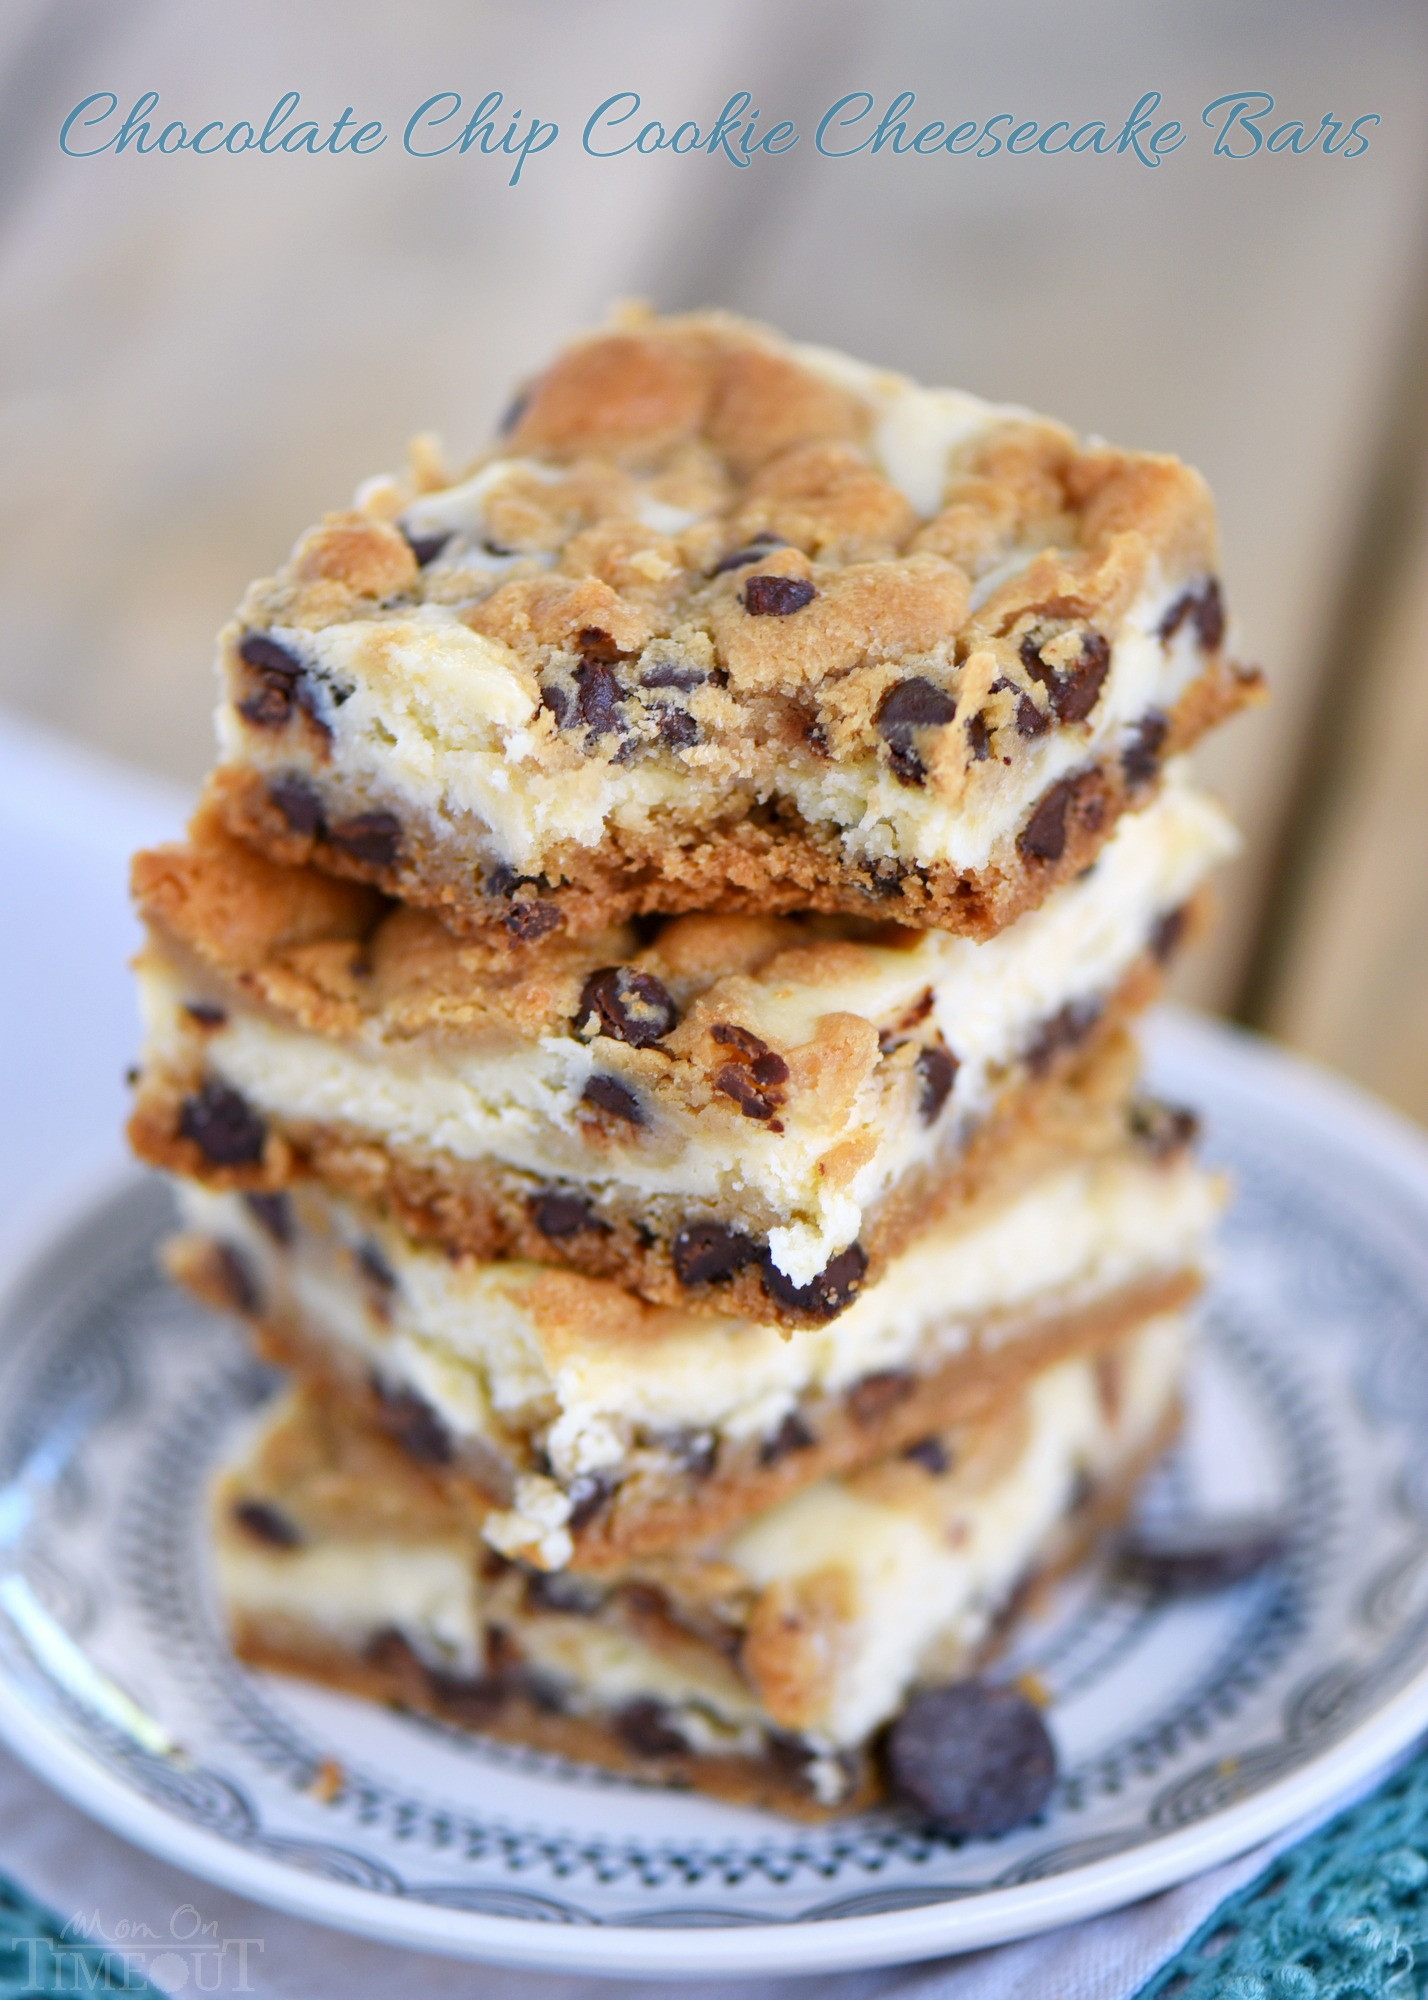 Cheesecake Cookie Recipe Inspirational Chocolate Chip Cookie Cheesecake Bars Mom Timeout